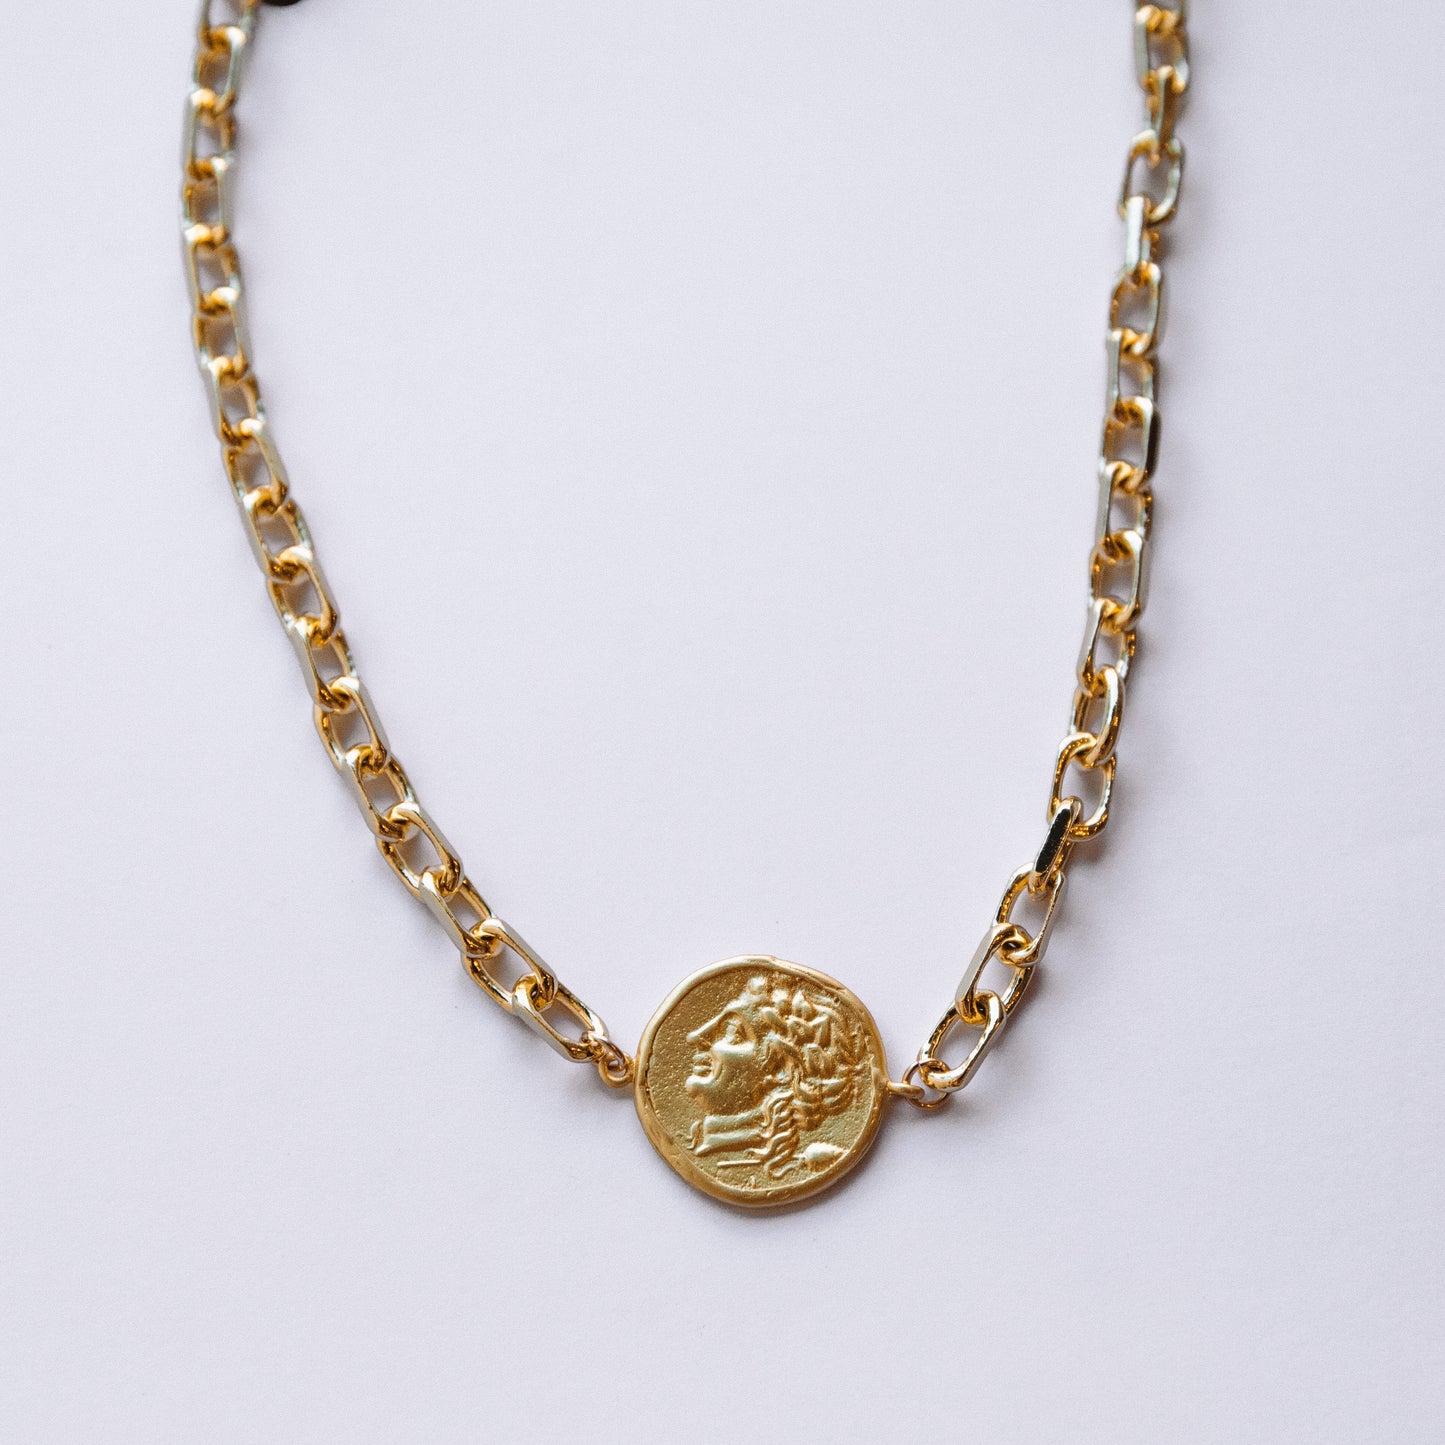 The Greek Coin Necklace